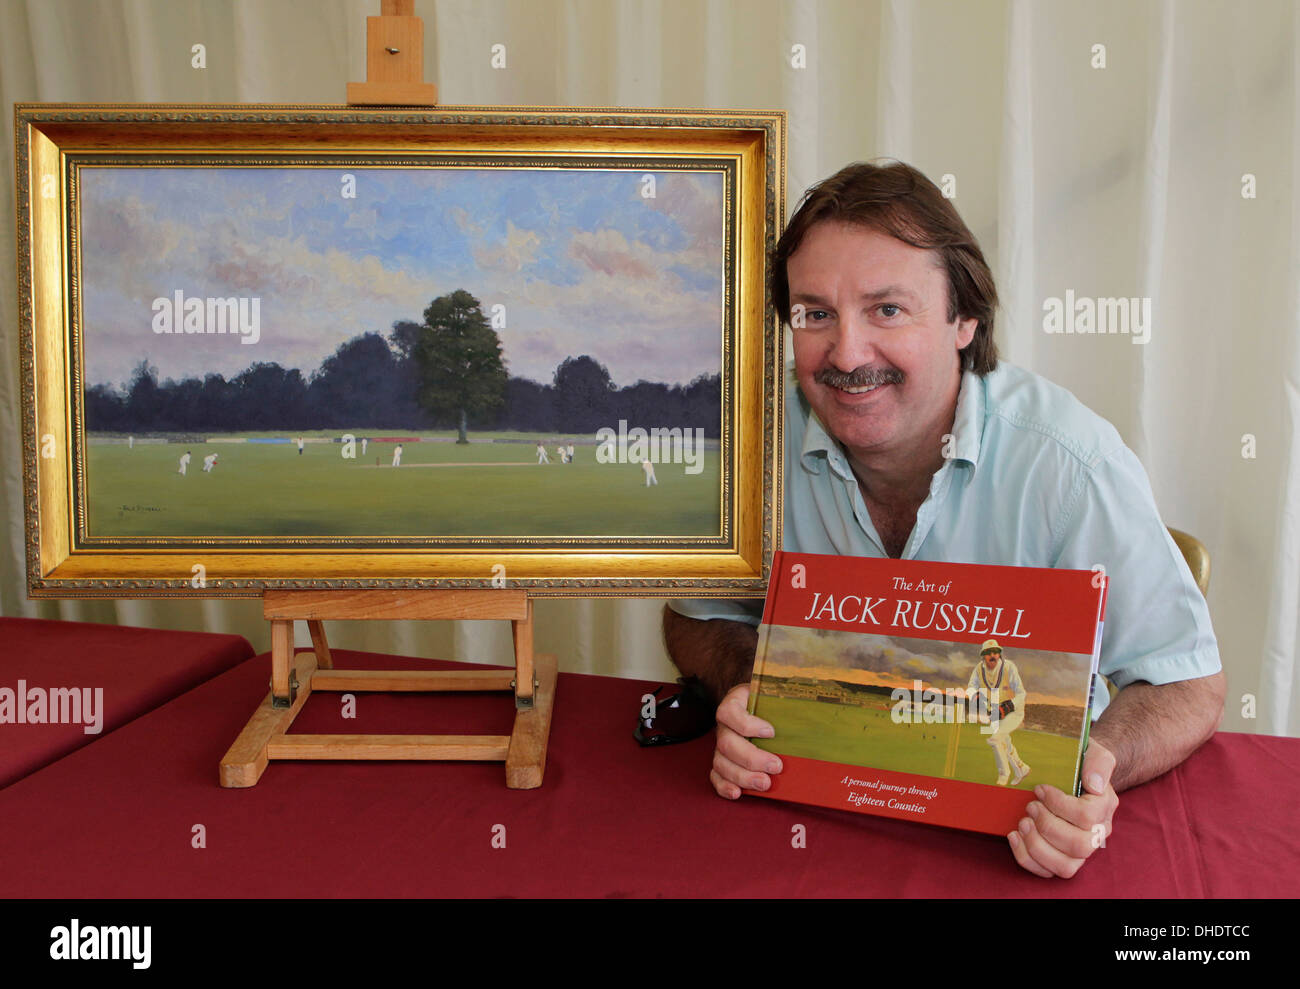 Jack Russell, cricketer and artist, promotes his book while sitting next to one of his paintings of the Canterbury Lime Tree. Stock Photo